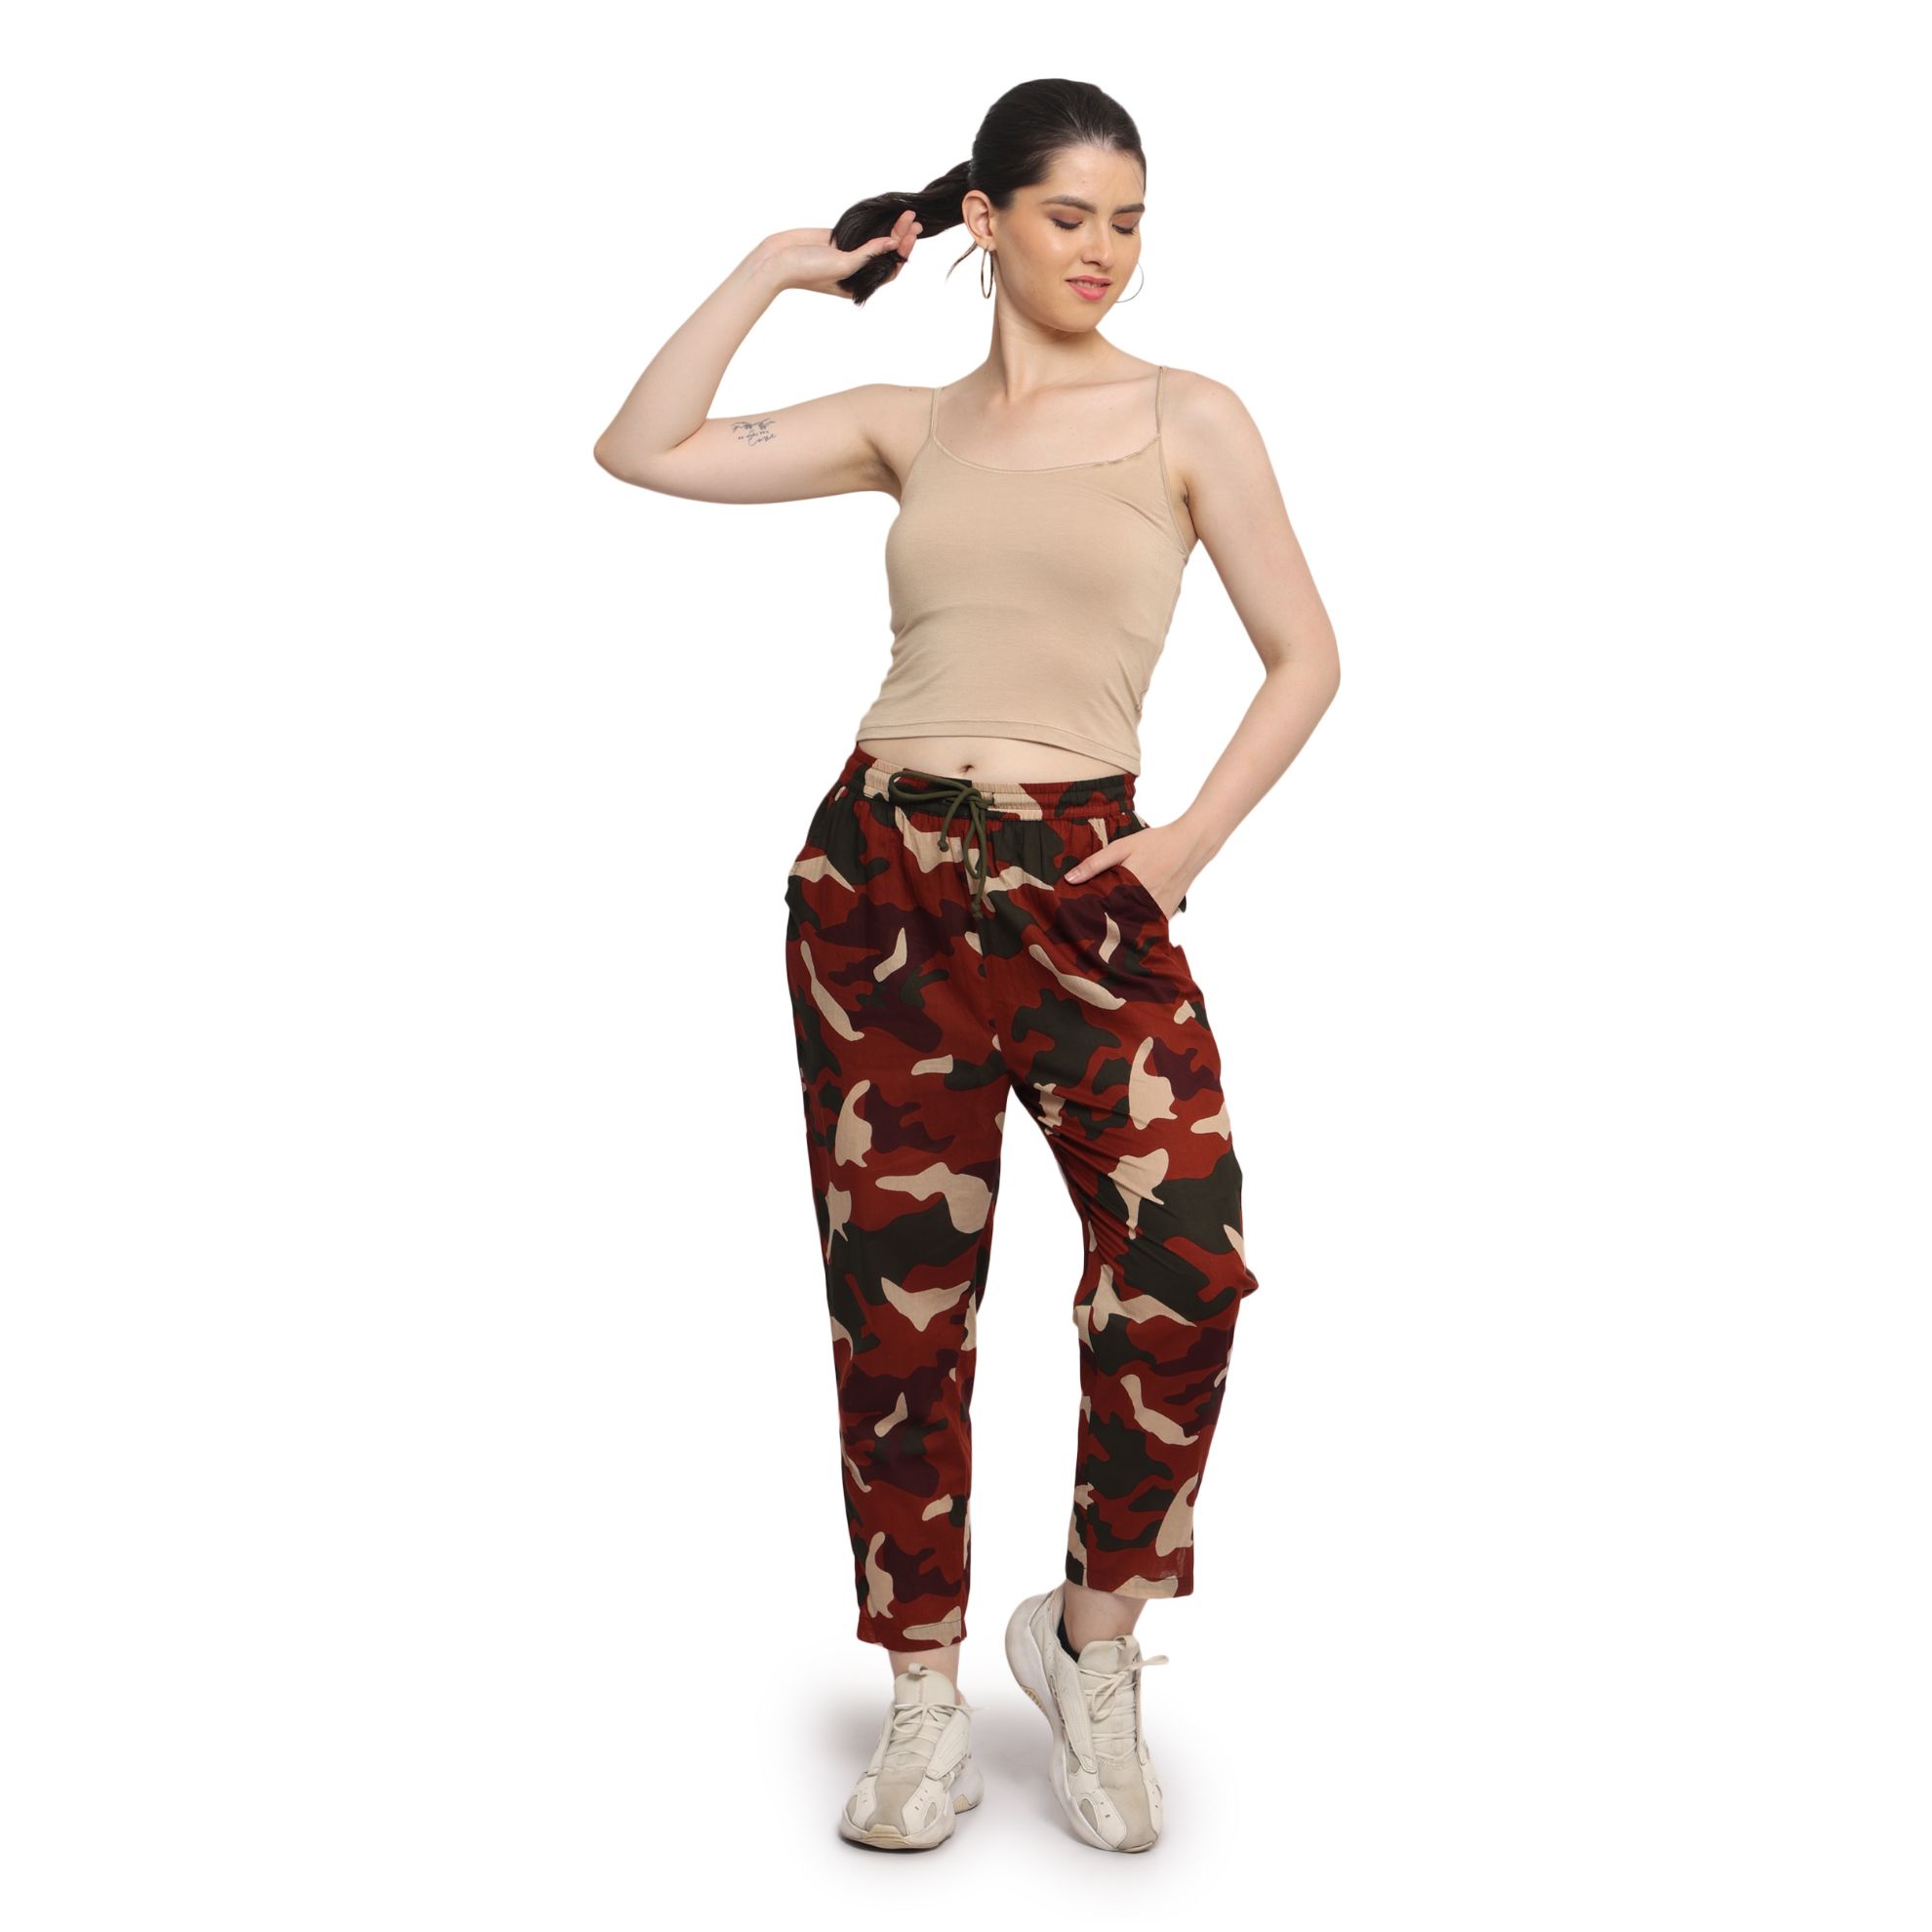 Womens Camo Cargo Pants Camouflage Print Hiking Long Pant Casual Workout  Trousers Outdoor Combat Military Pants Sweats with Pockets for Women  Pantalones Cargo Negros Tallas Grandes at Amazon Women's Clothing store